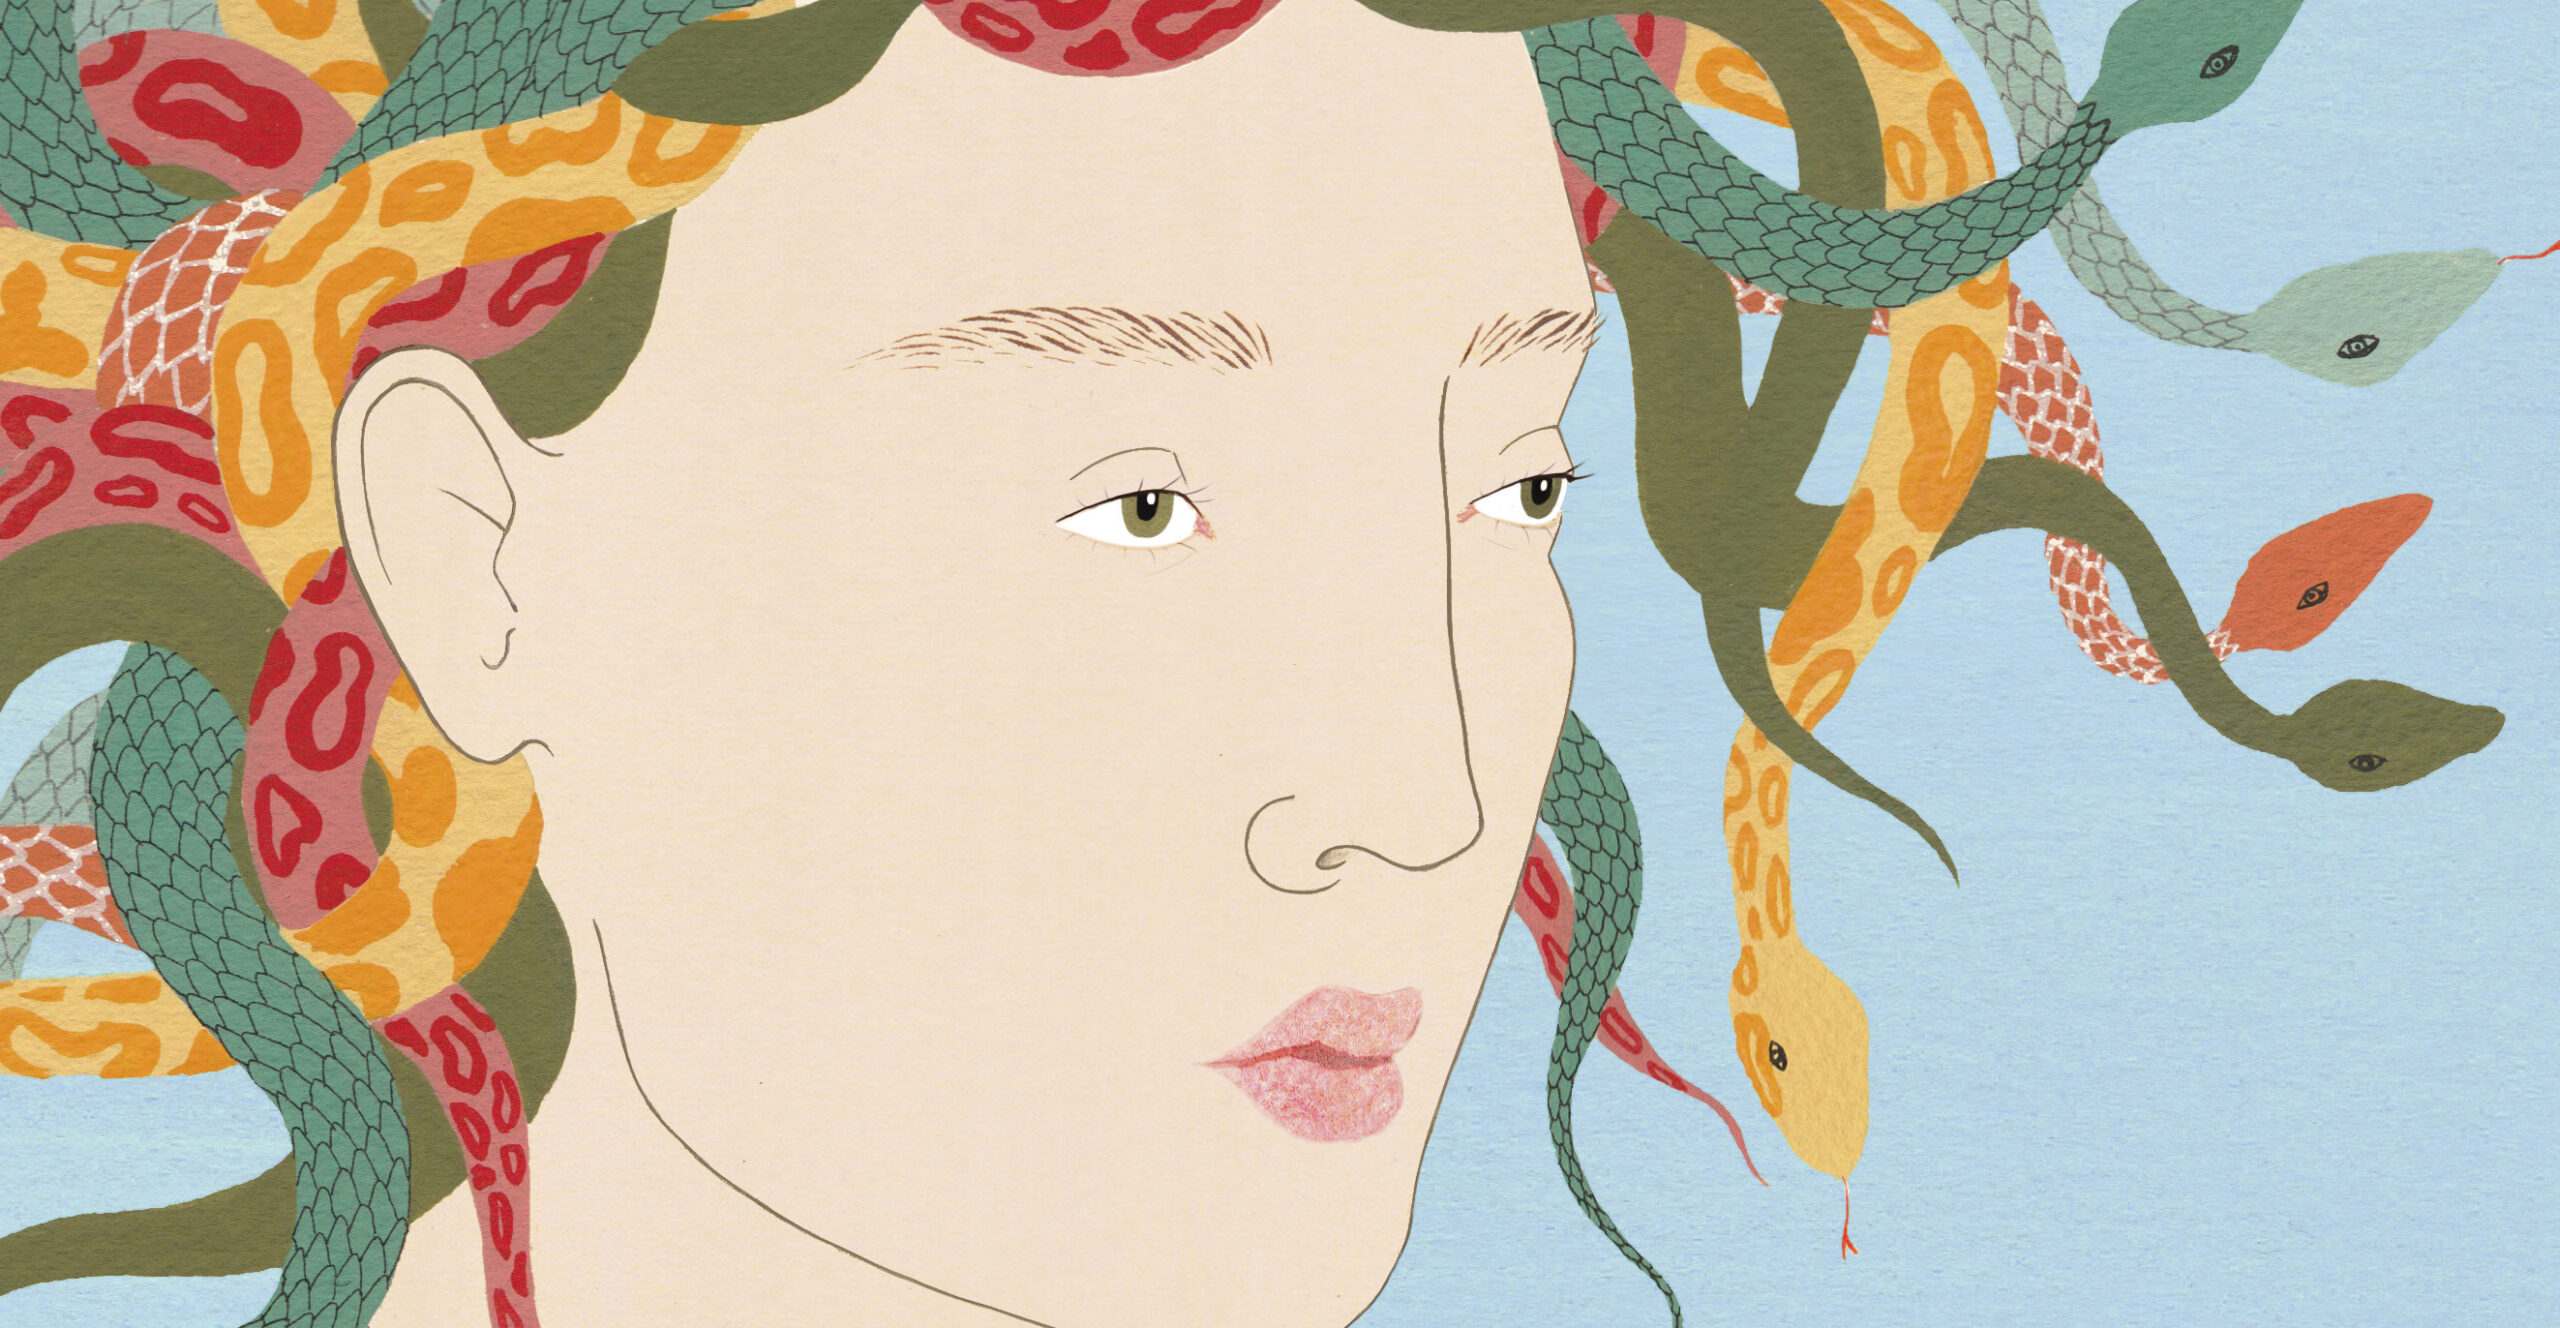 Medusa close up. Warriors, Witches, Women: Mythology’s Fiercest Females is a new book by Kate Hodges, illustrated by Harriet Lee-Merrion, and published by White Lion Publishing.